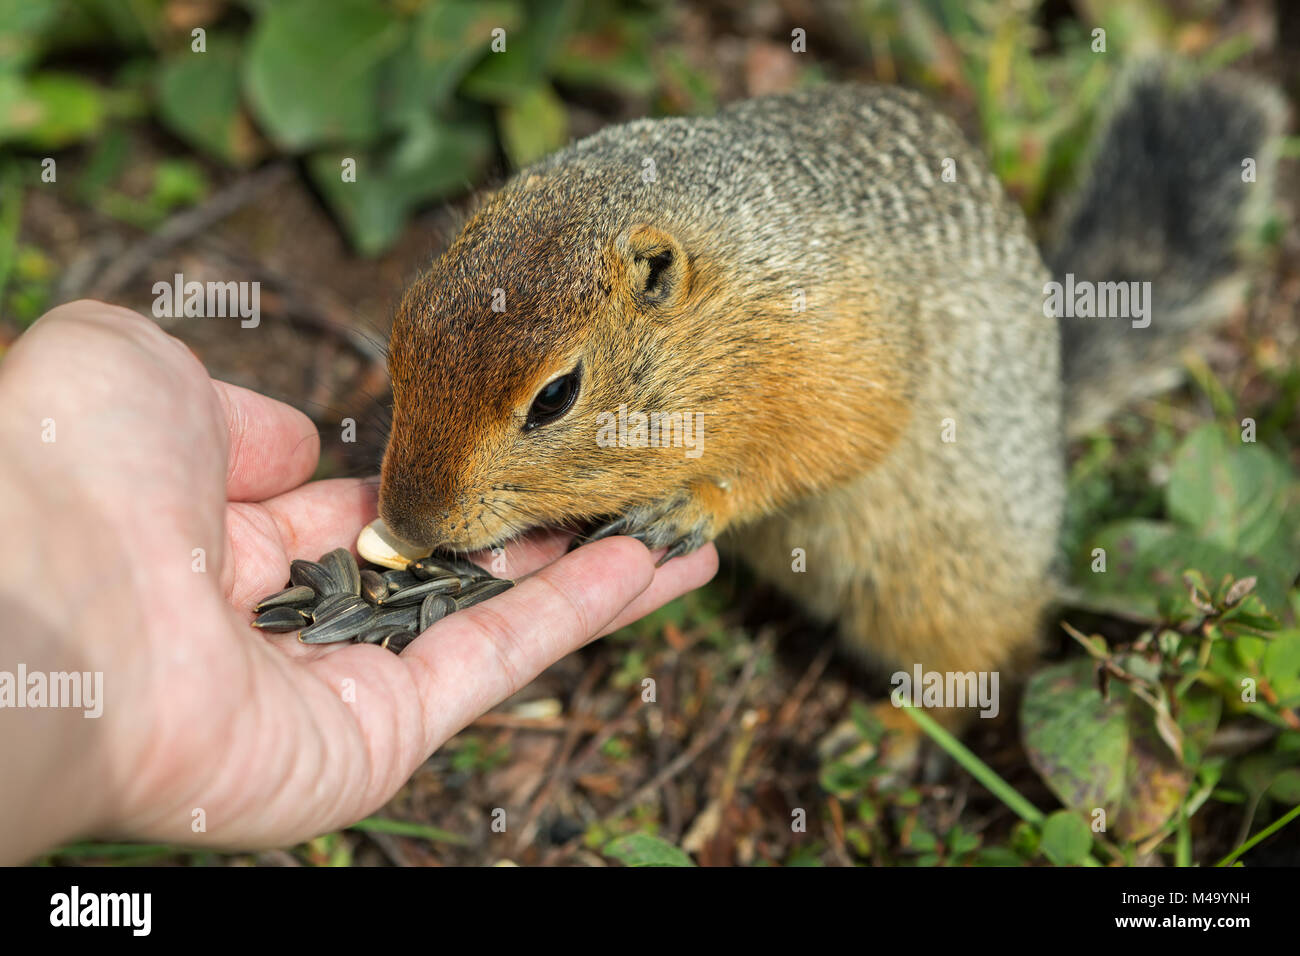 Arctic ground squirrel eats seeds from human hands. Kamchatka. Stock Photo